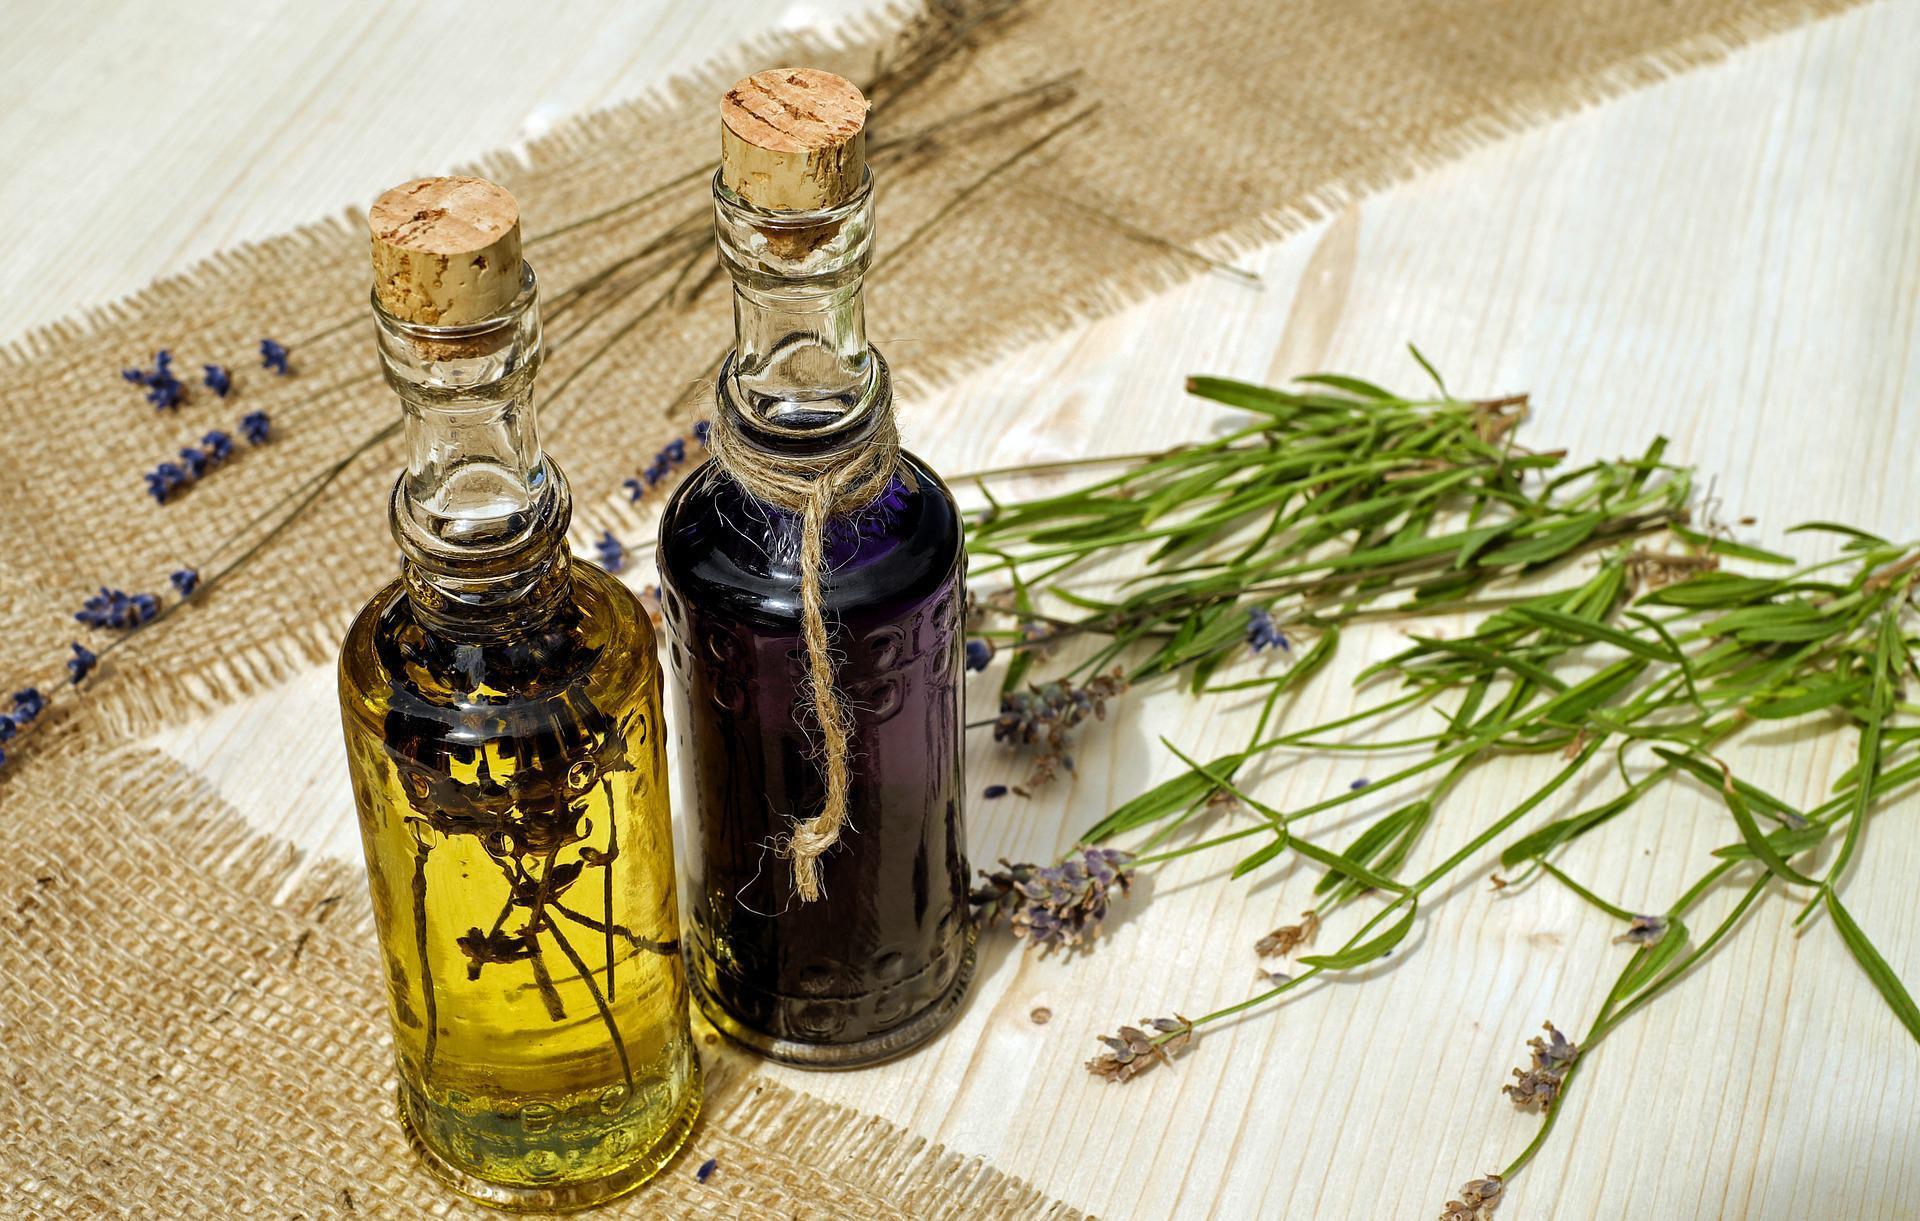 Oils and herbs